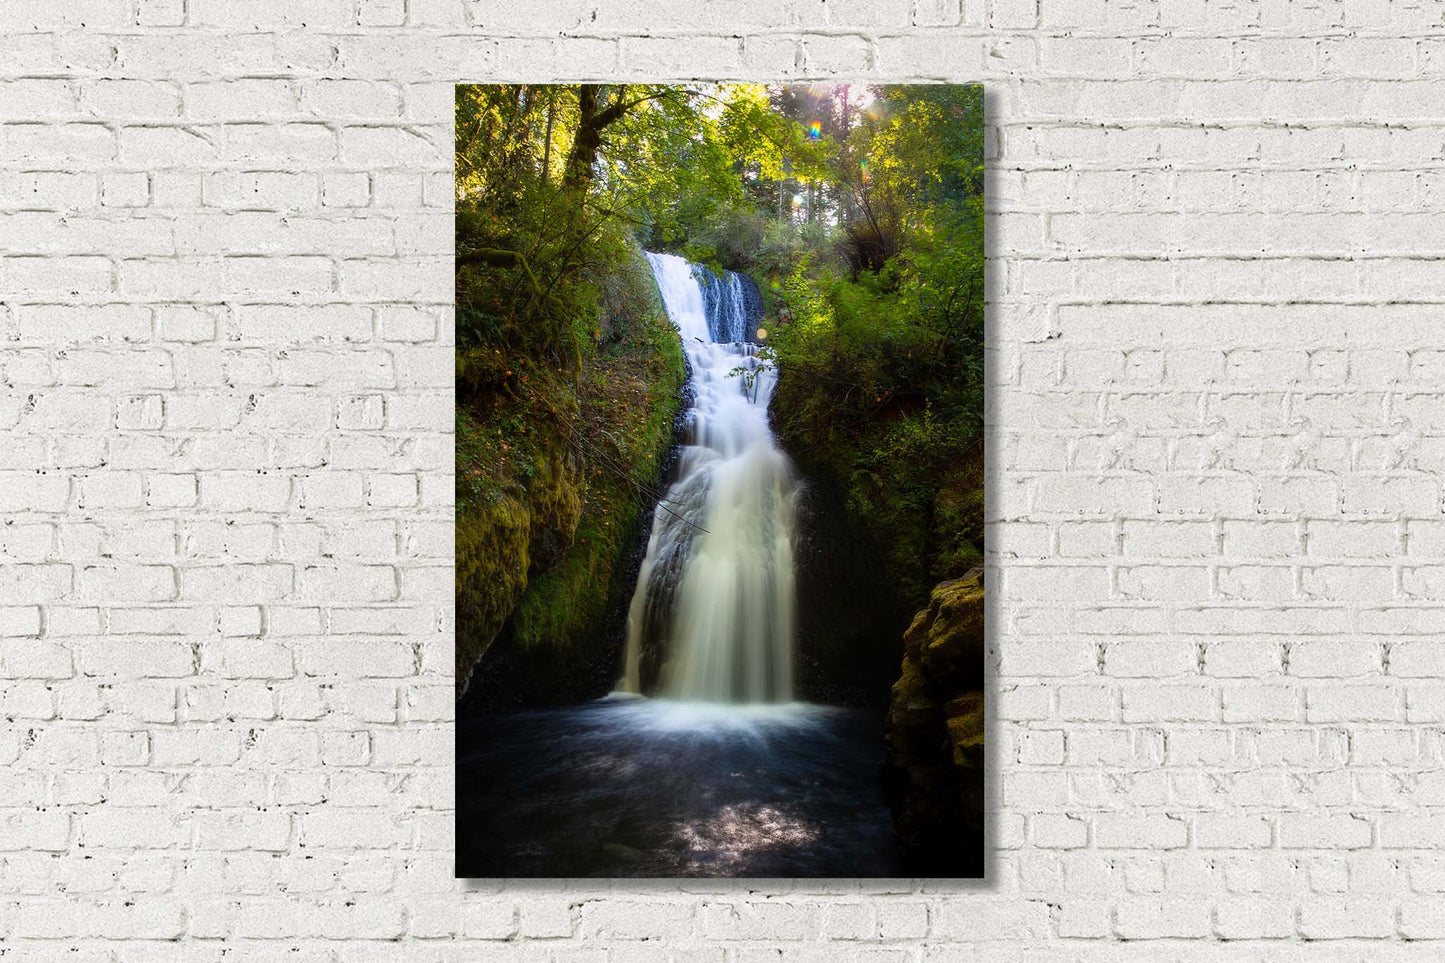 Vertical Pacific Northwest waterfall metal print of Bridal Veil Falls on a summer afternoon in the Columbia River Gorge in Oregon by Sean Ramsey of Southern Plains Photography.